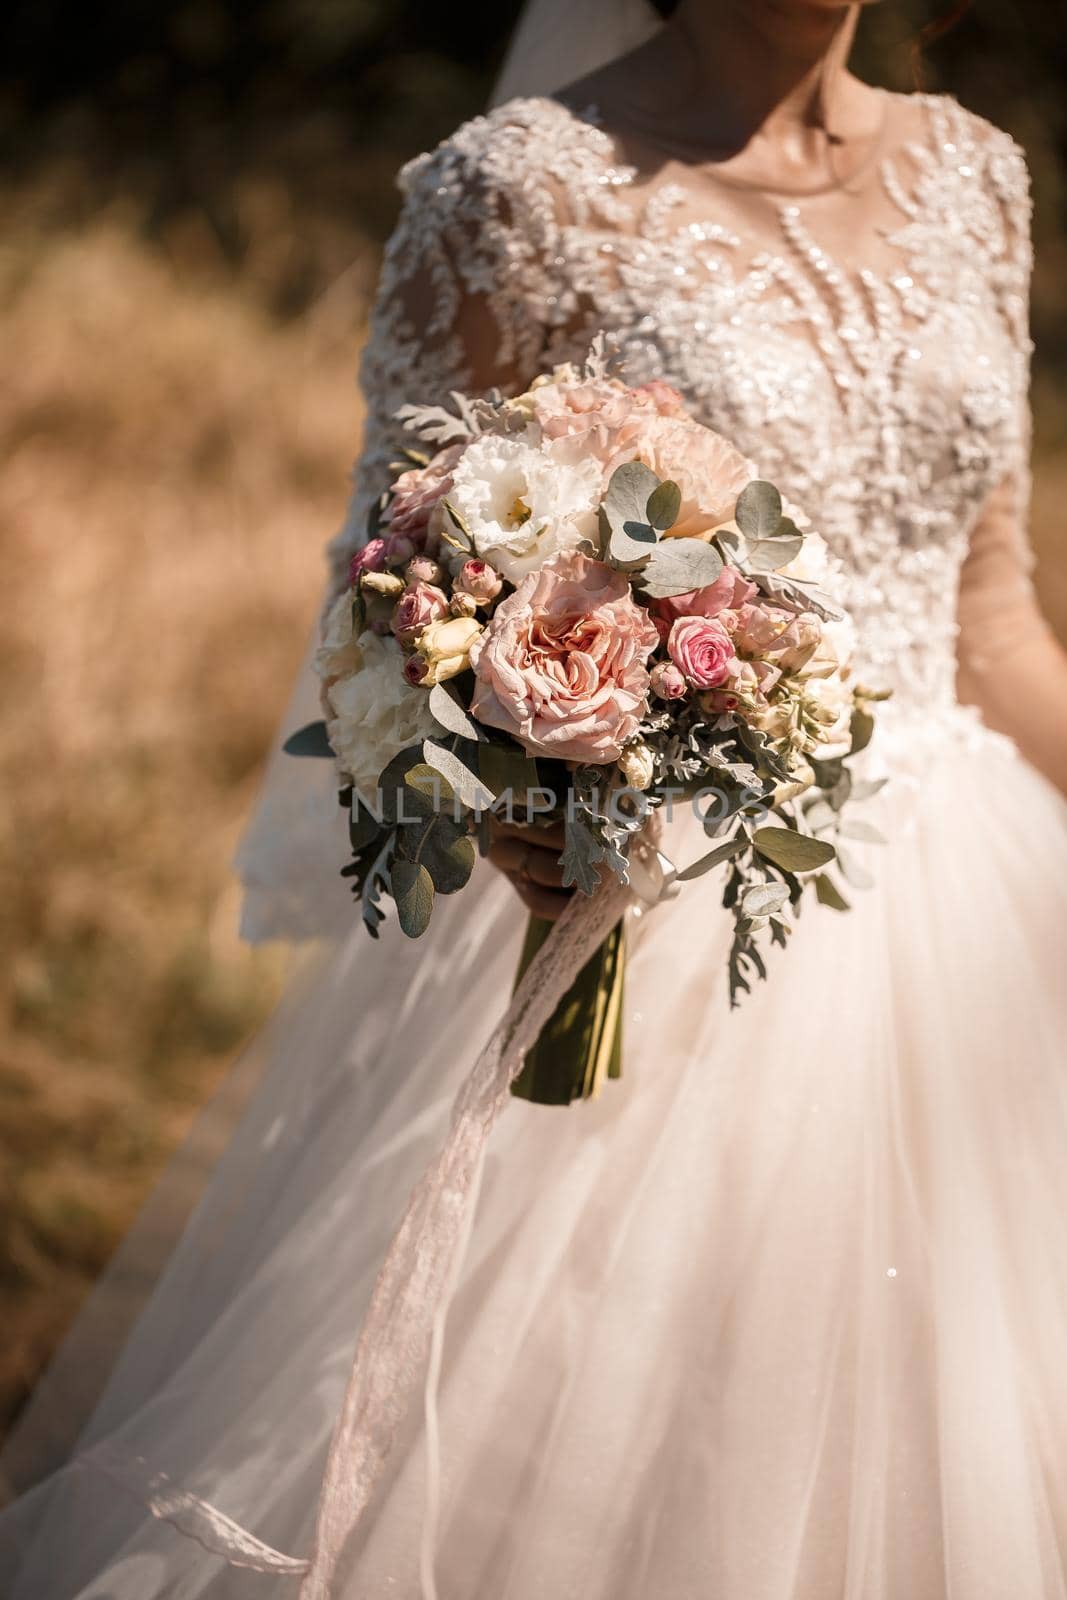 A bouquet of fresh flowers in the hands of the bride by Dmitrytph